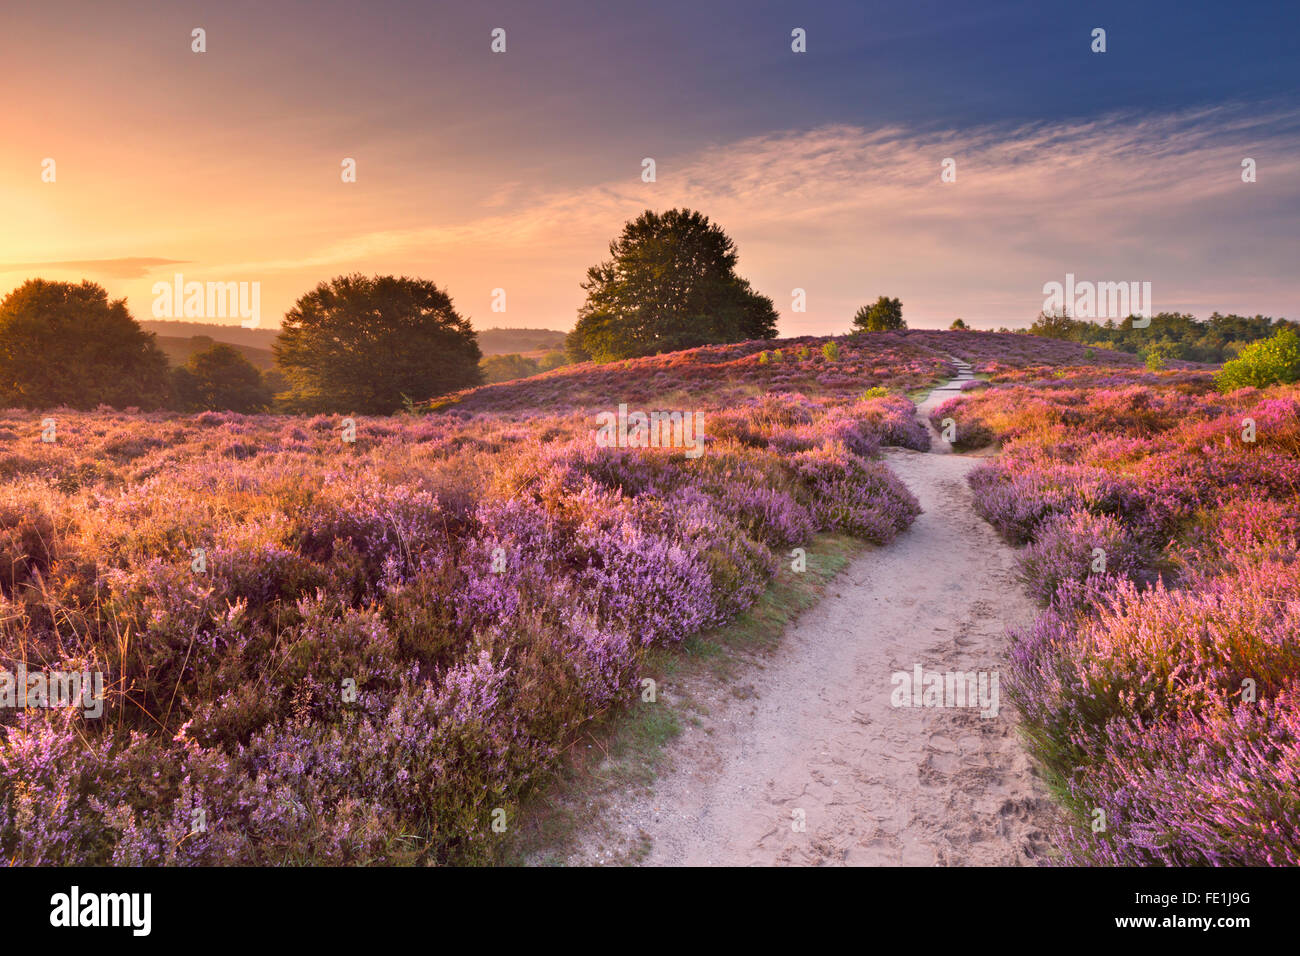 A path through endless hills with blooming heather at sunrise. Photographed at the Posbank in The Netherlands. Stock Photo